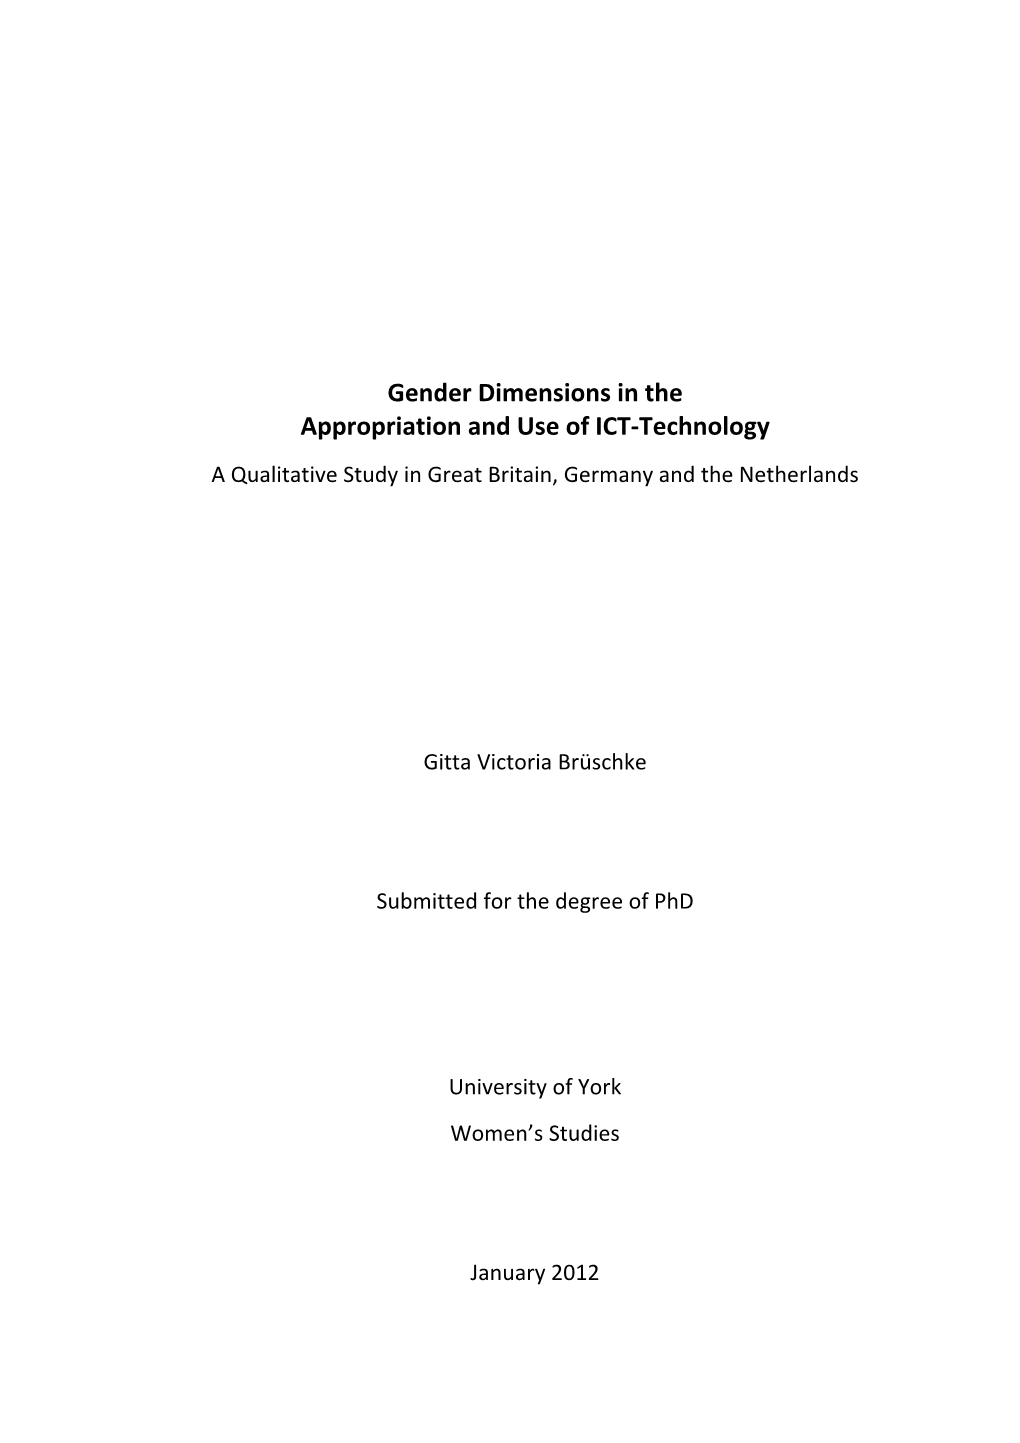 Gender Dimensions in the Appropriation and Use of ICT‐Technology a Qualitative Study in Great Britain, Germany and the Netherlands